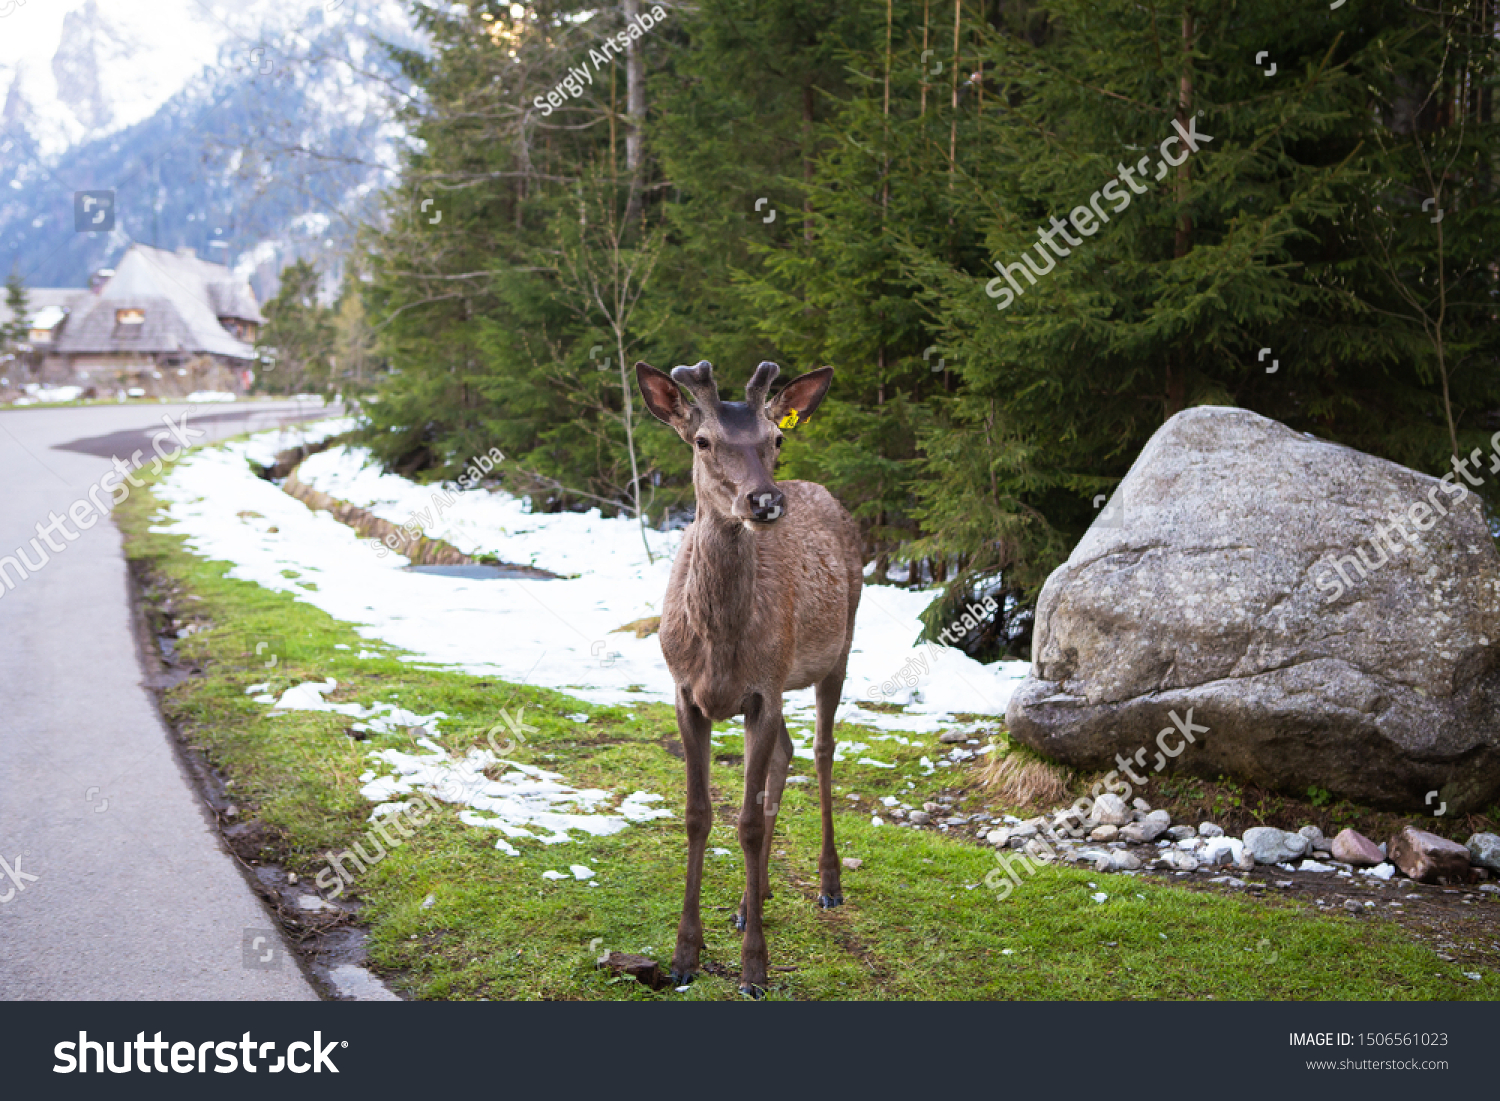 A beautiful and cute deer stands near the road near the high mountains.  Dense forest.  Rest at nature. #1506561023